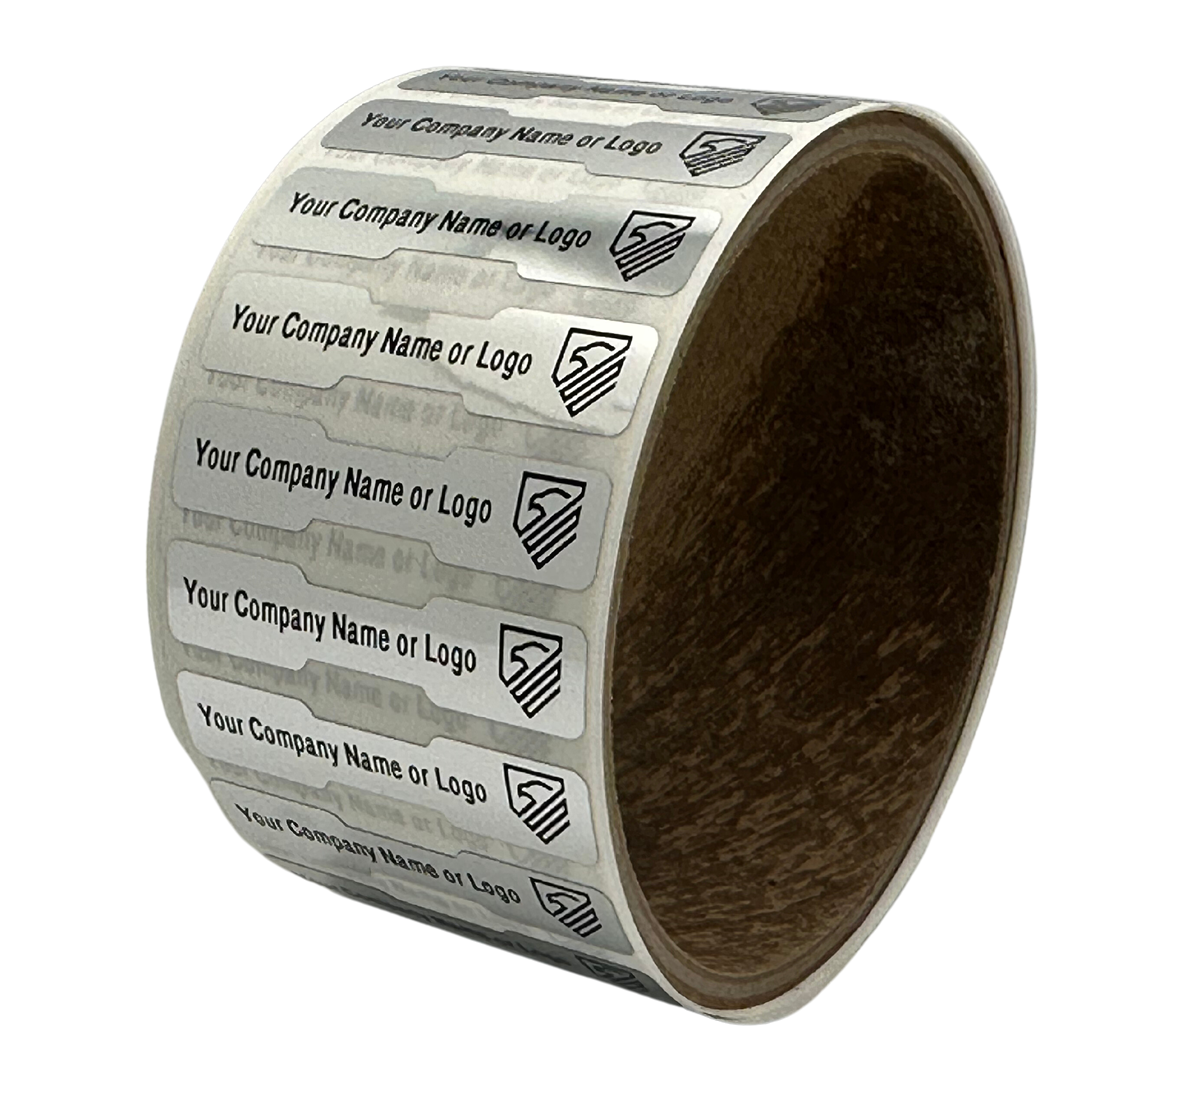 500 Non Residue Silver Bright Chrome Tamper-Evident Stickers TamperGuard® Security Label Seal , Dogbone Shape Size 1.75" x 0.375 (44mm x 9mm) >Click on item details to customize.